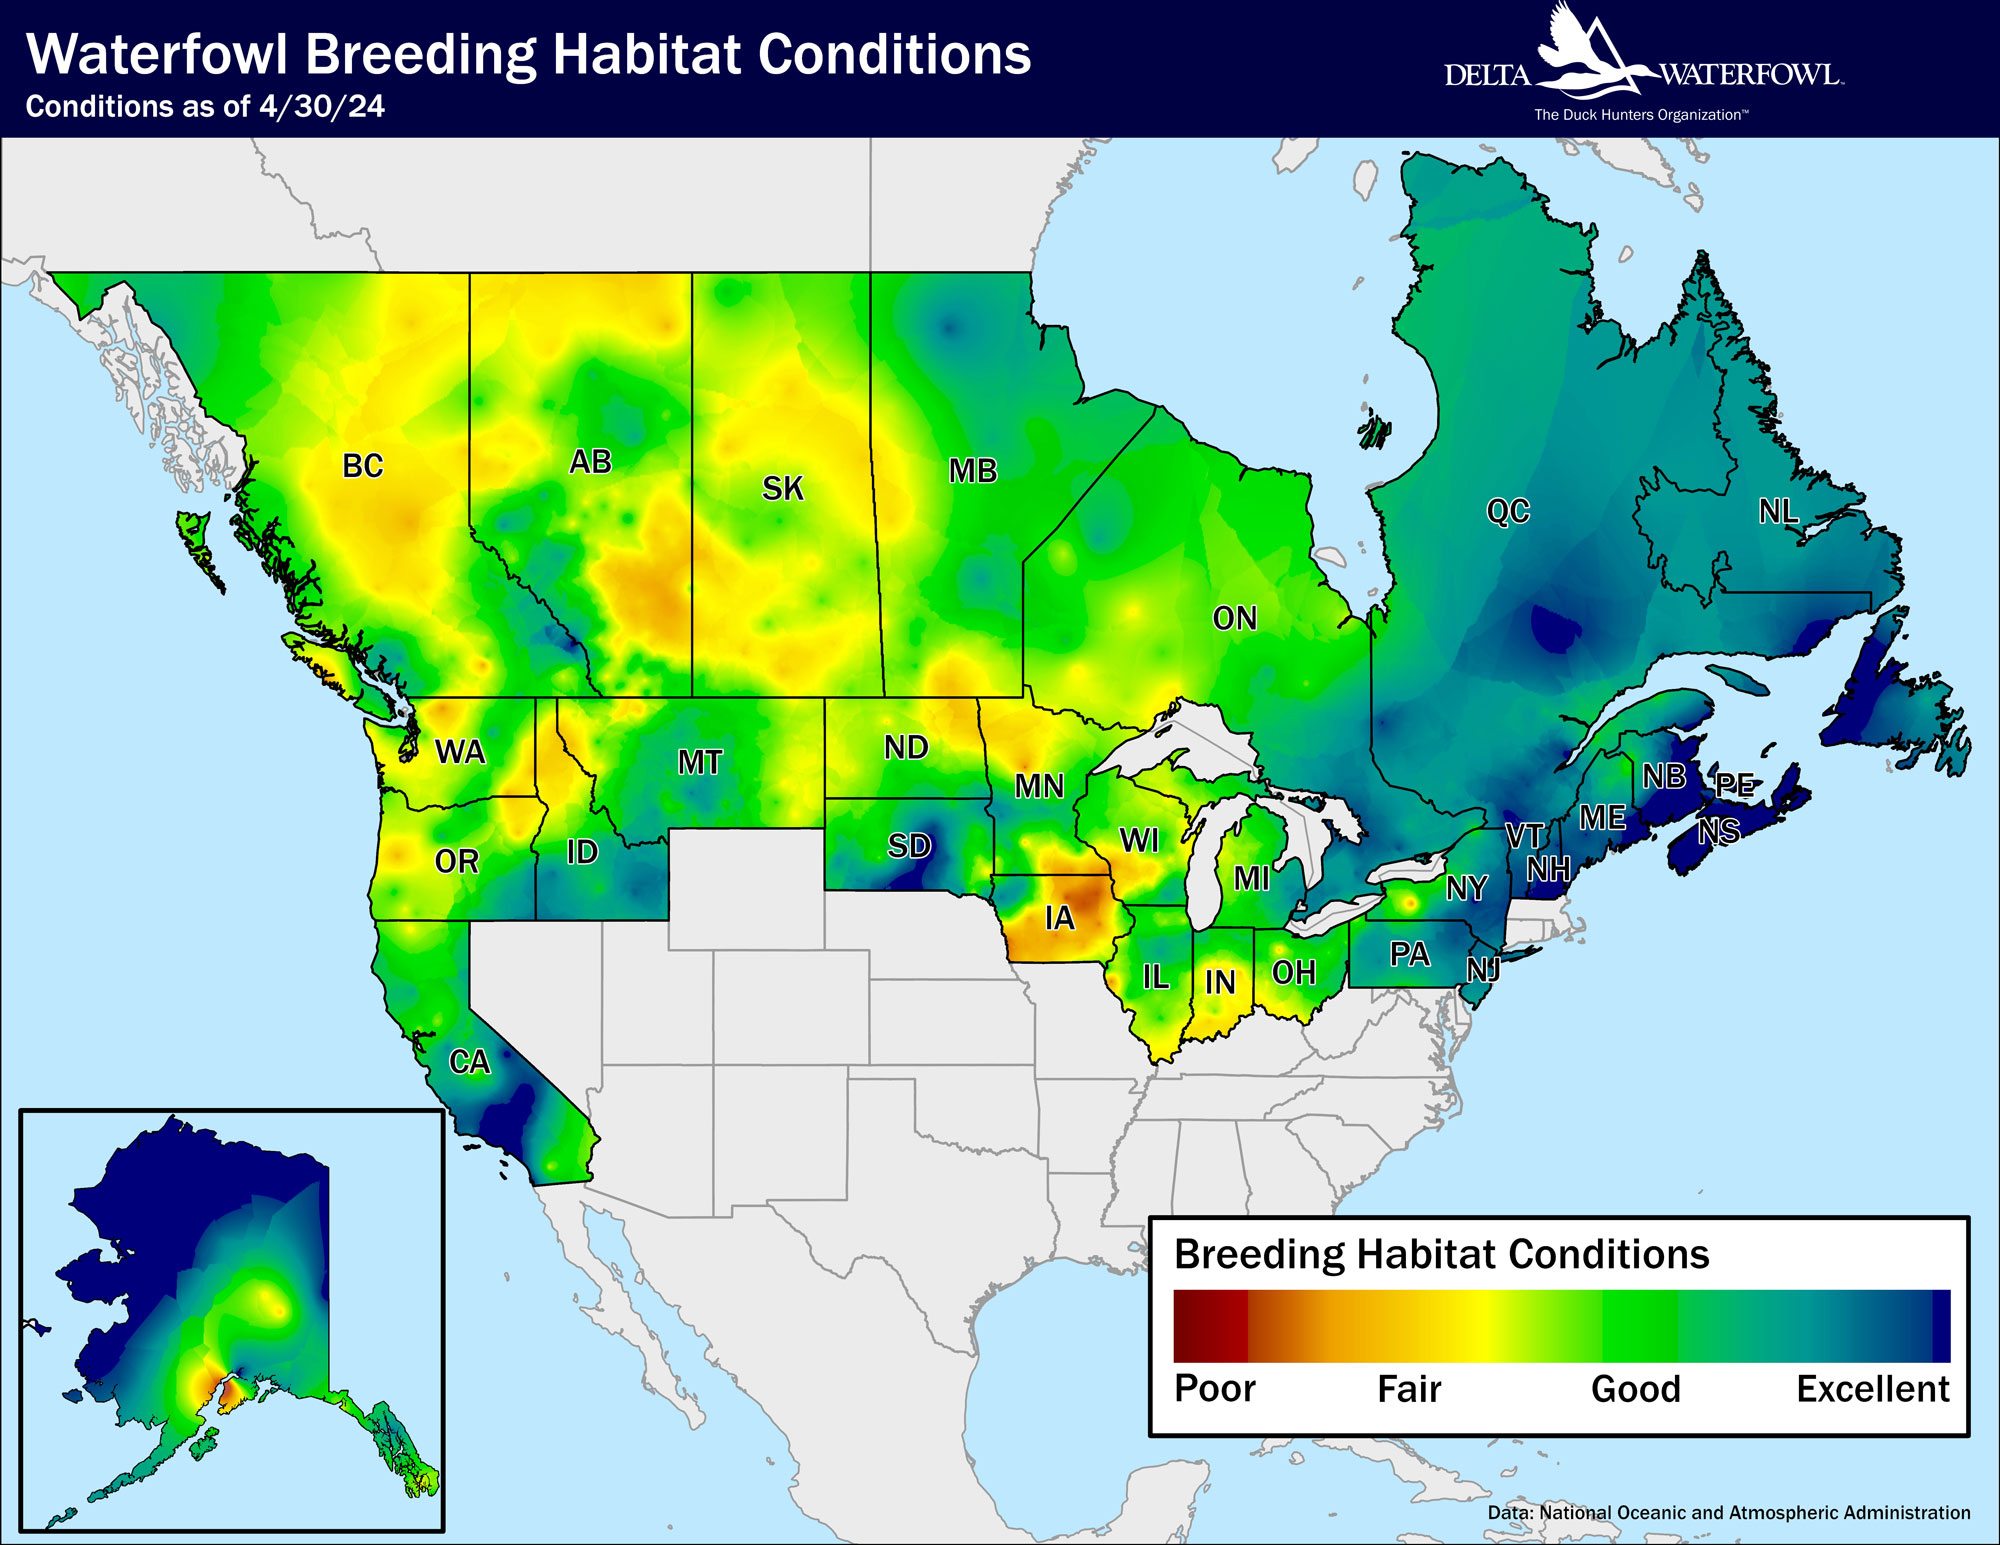 Duck breeding conditions moisture map for April 30, 2024. Map shows that conditions are good in much of the prairie pothole region with drought still in Iowa and southern Minnesota.